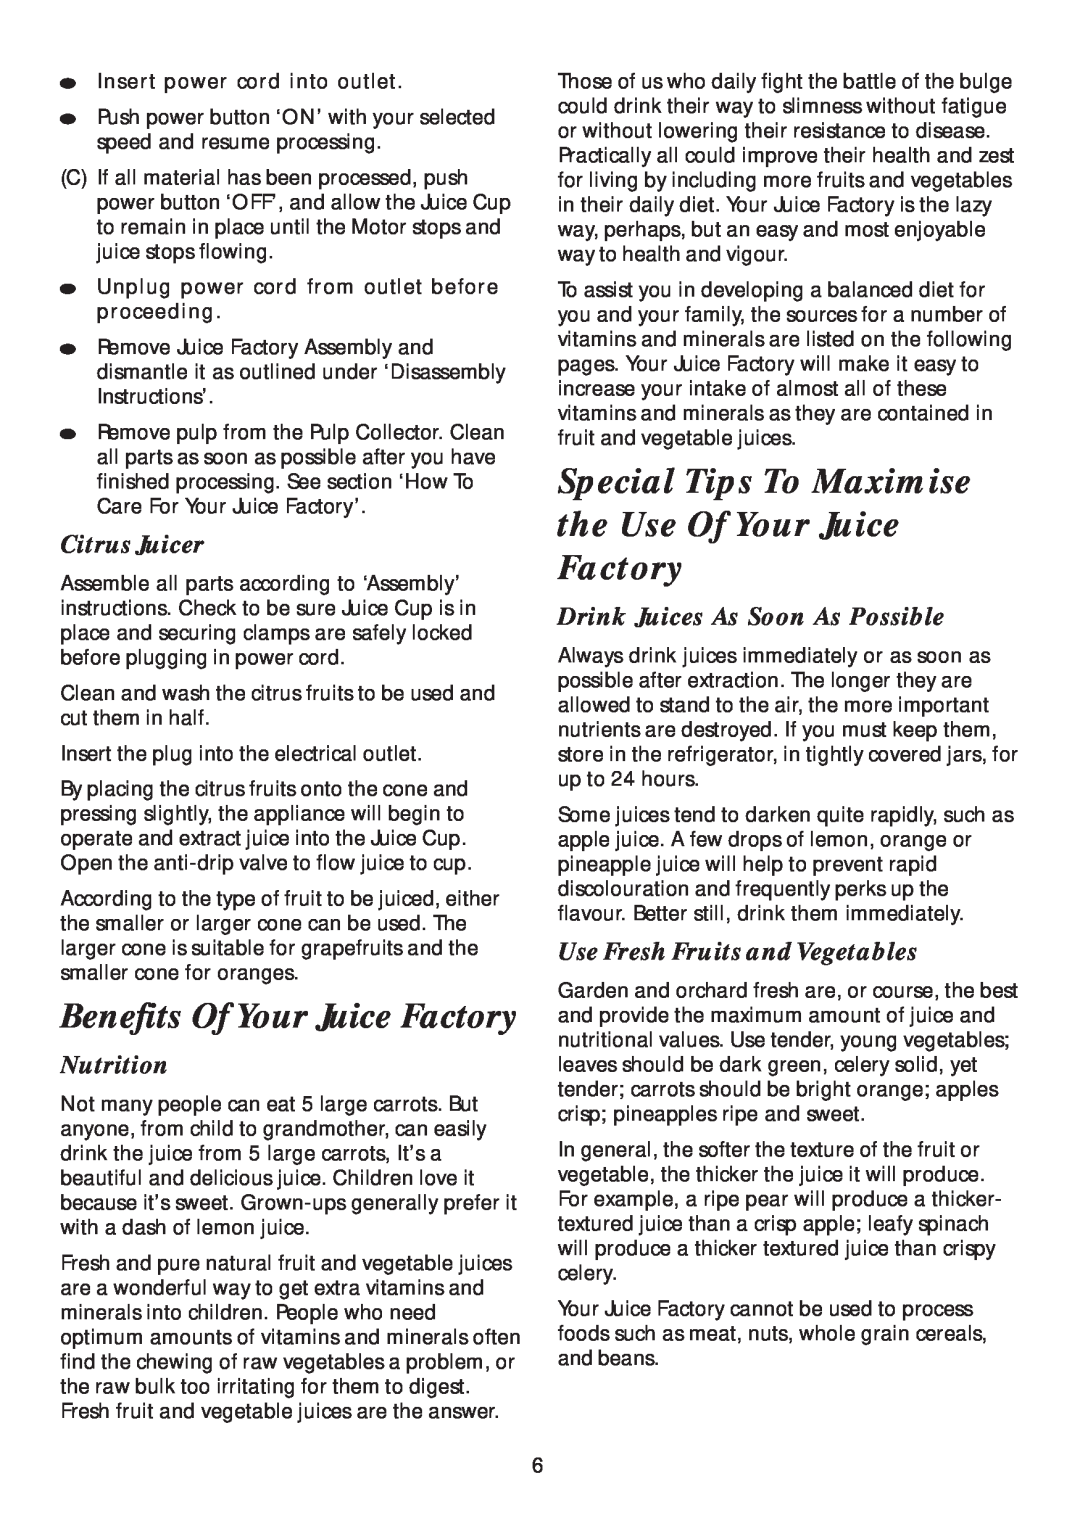 Mistral MJF50 Benefits Of Your Juice Factory, Special Tips To Maximise the Use Of Your Juice, Citrus Juicer, Nutrition 